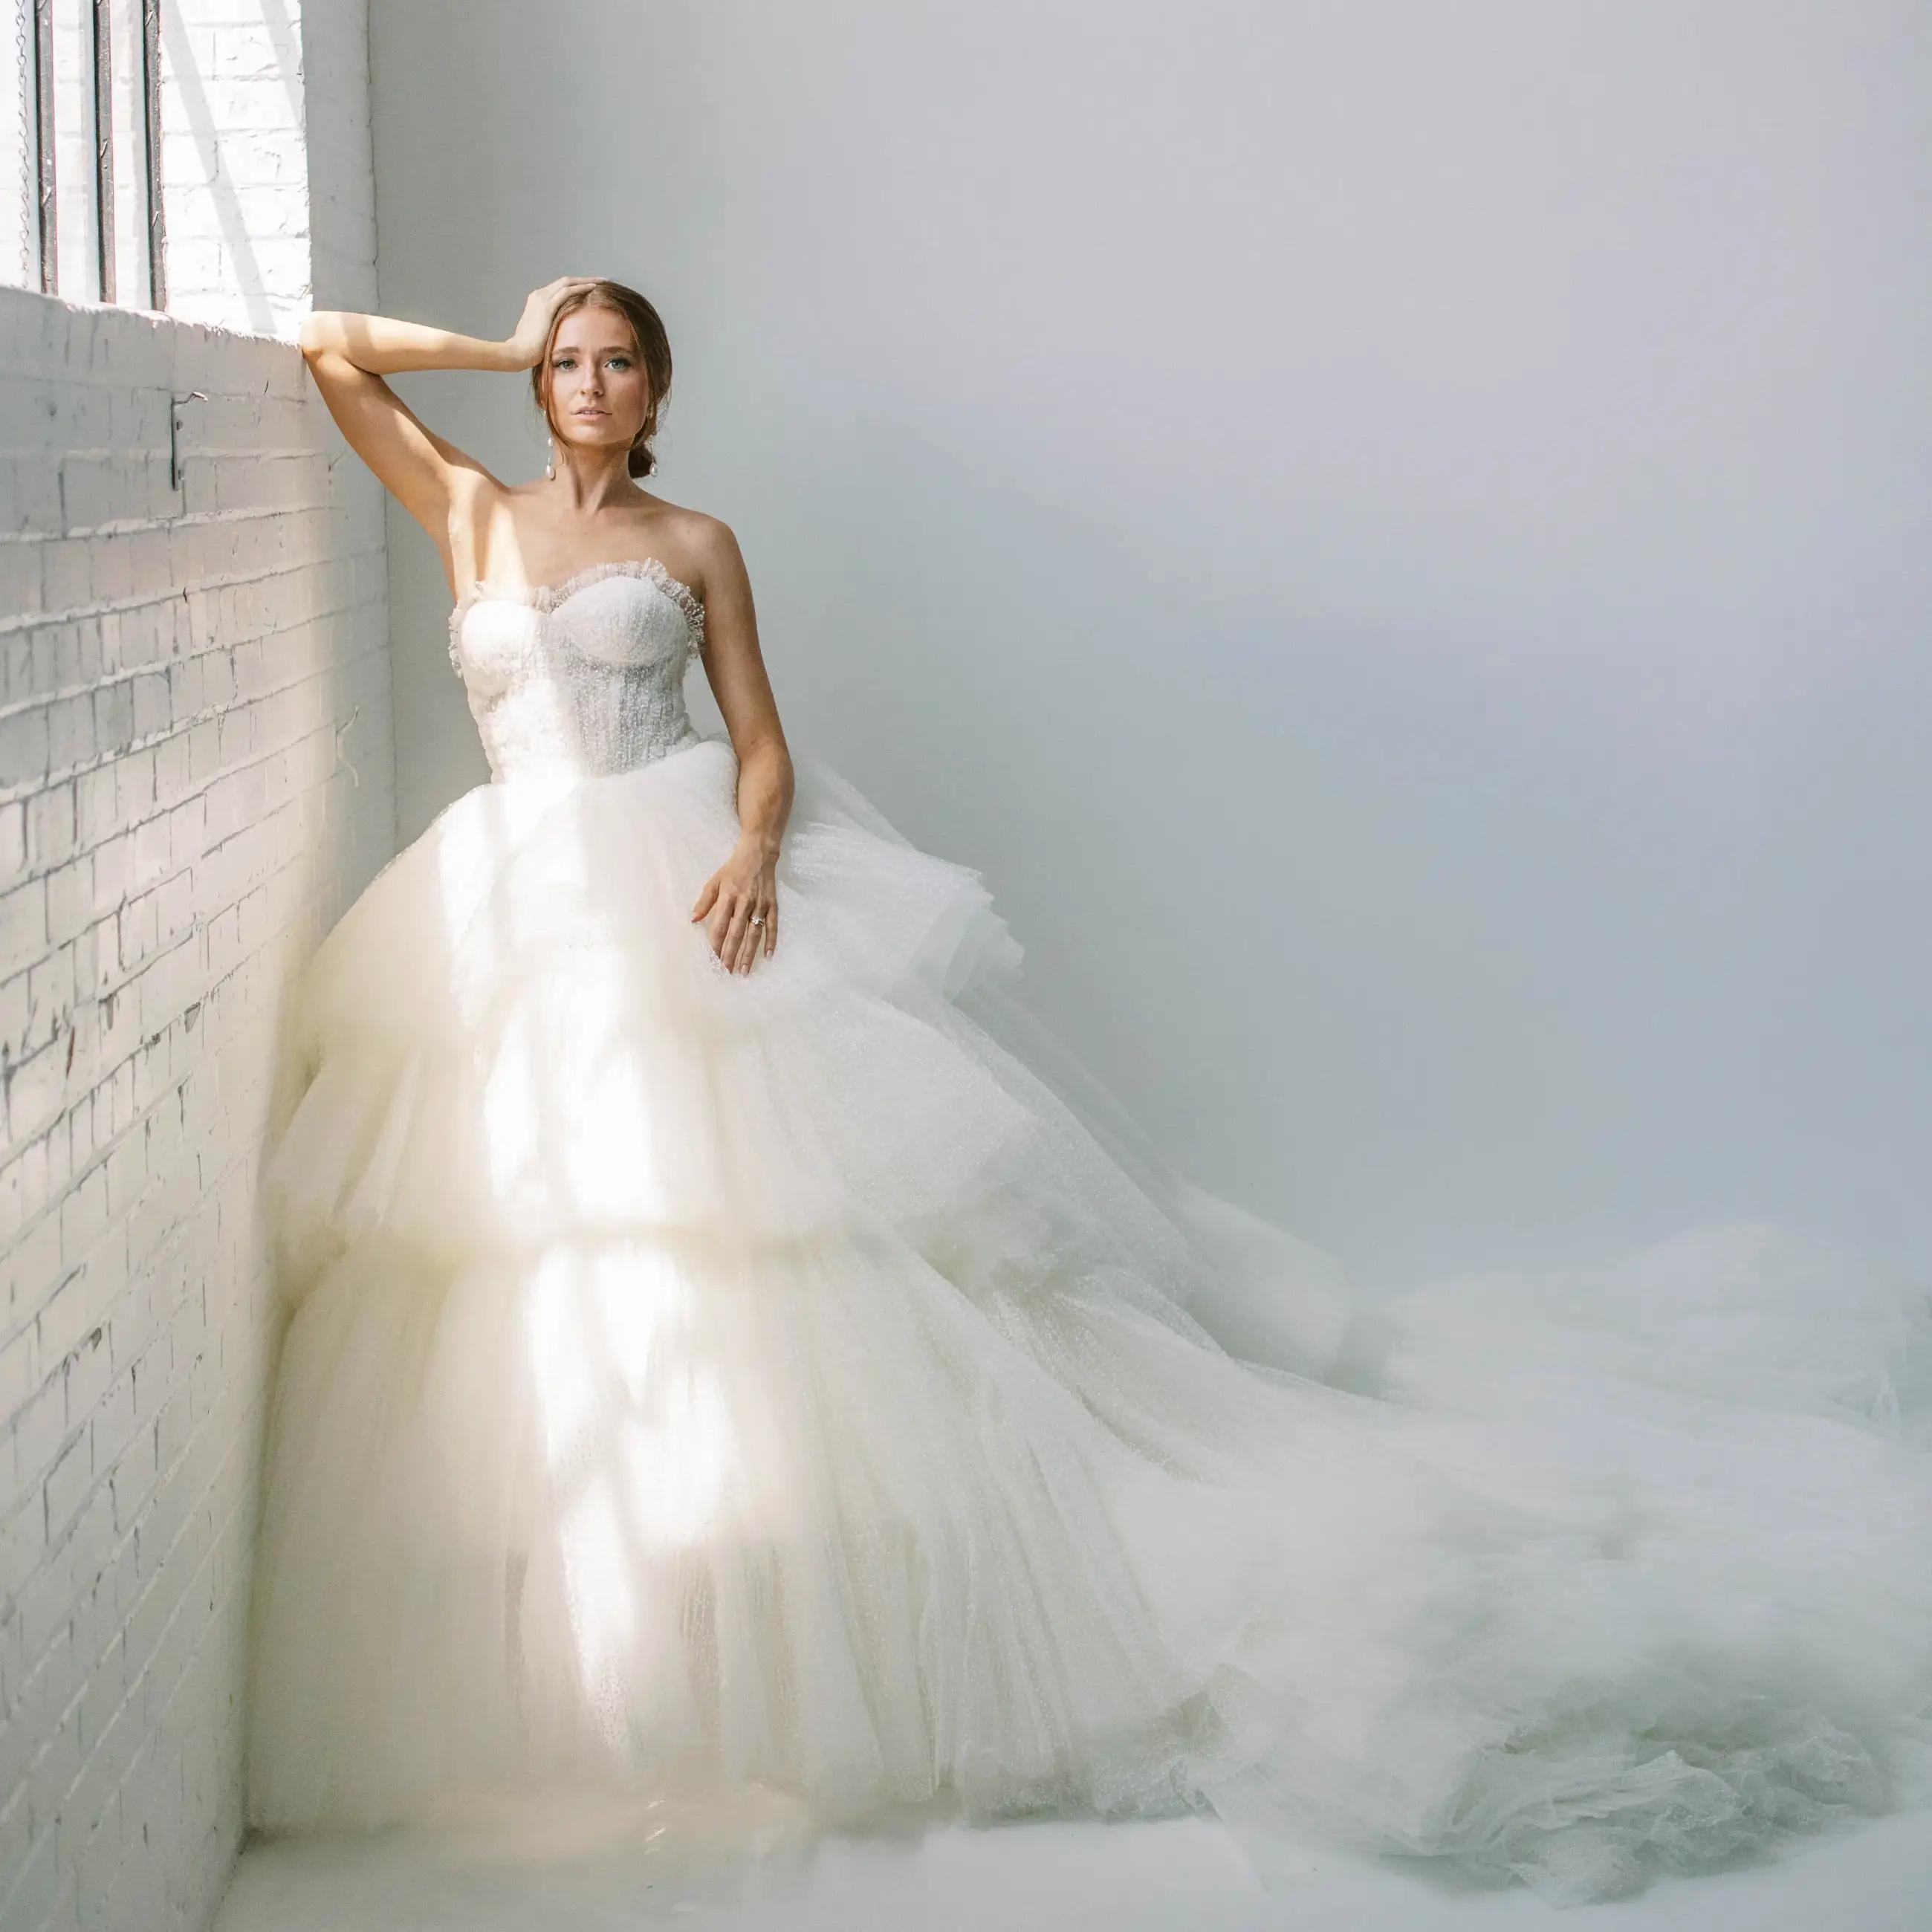 Ballgown or Mermaid? How to Pick Your Bridal Silhouette. Mobile Image